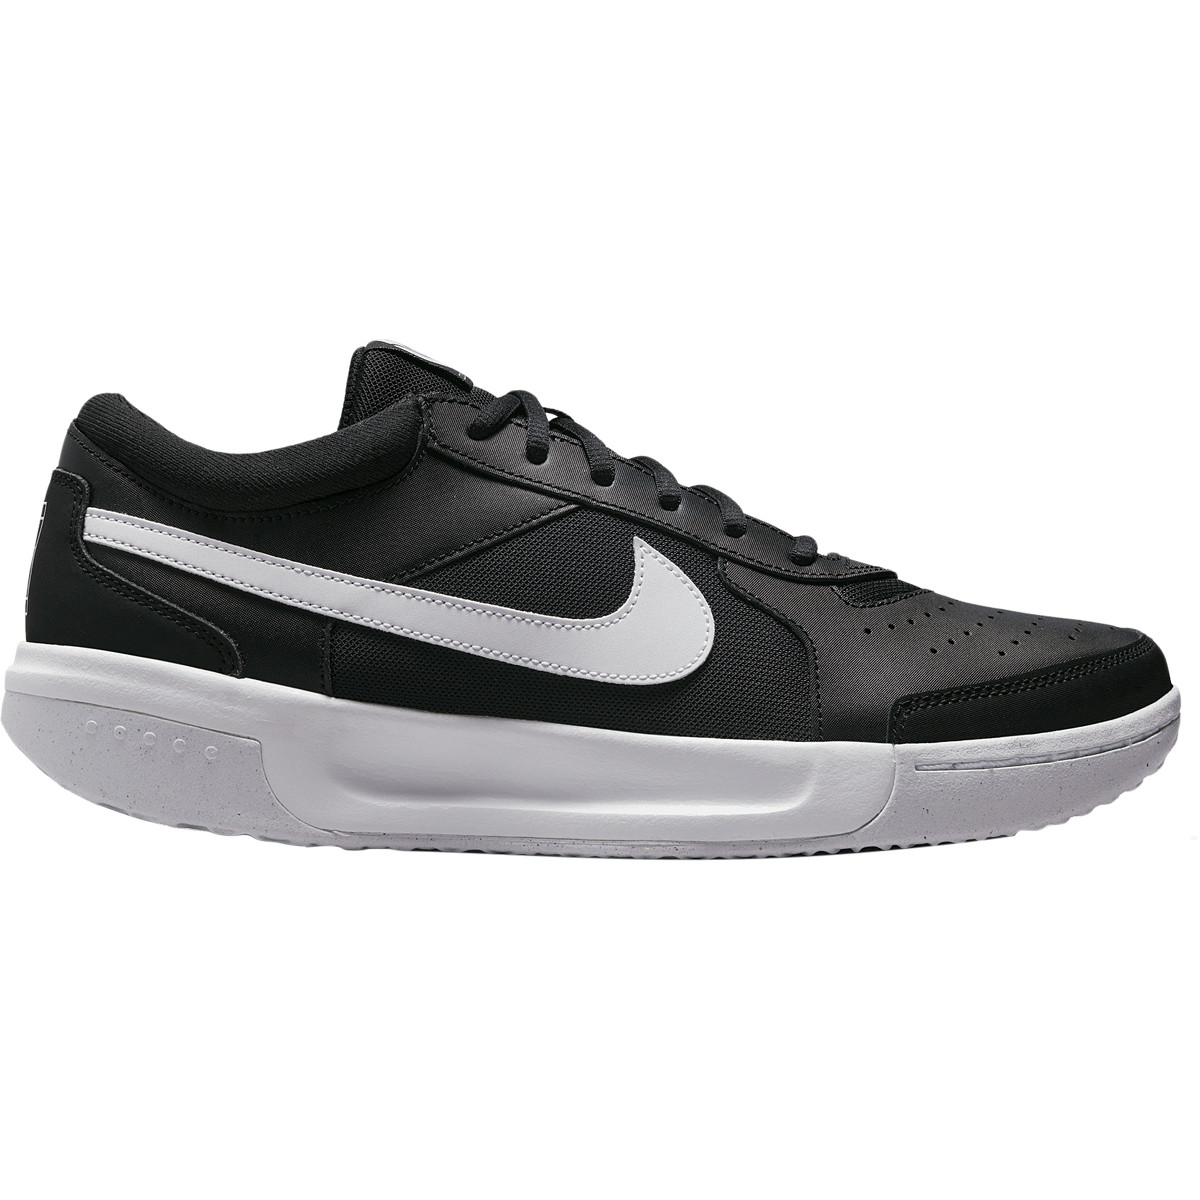 CHAUSSURES NIKE JUNIOR ZOOM COURT LITE 3 SURFACES DURES